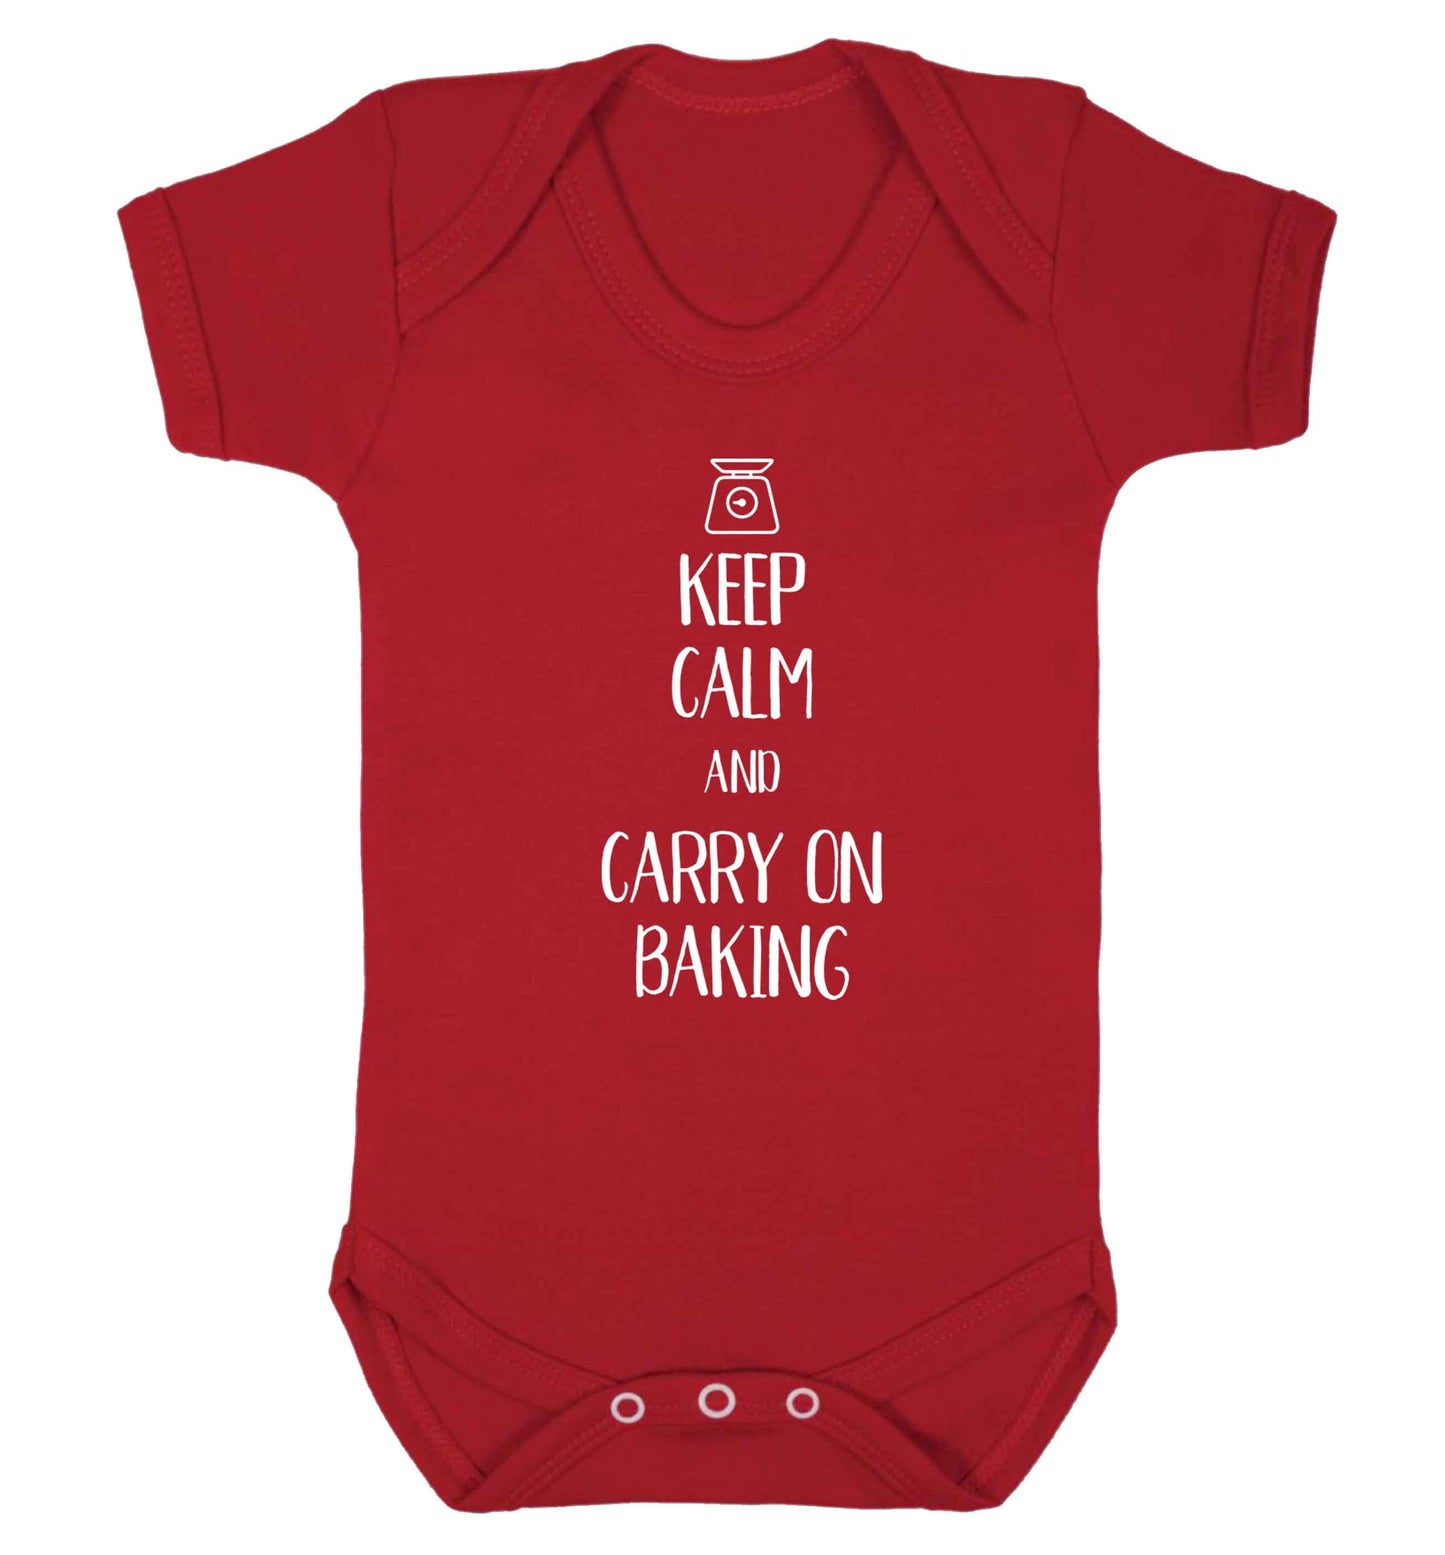 Keep calm and carry on baking Baby Vest red 18-24 months